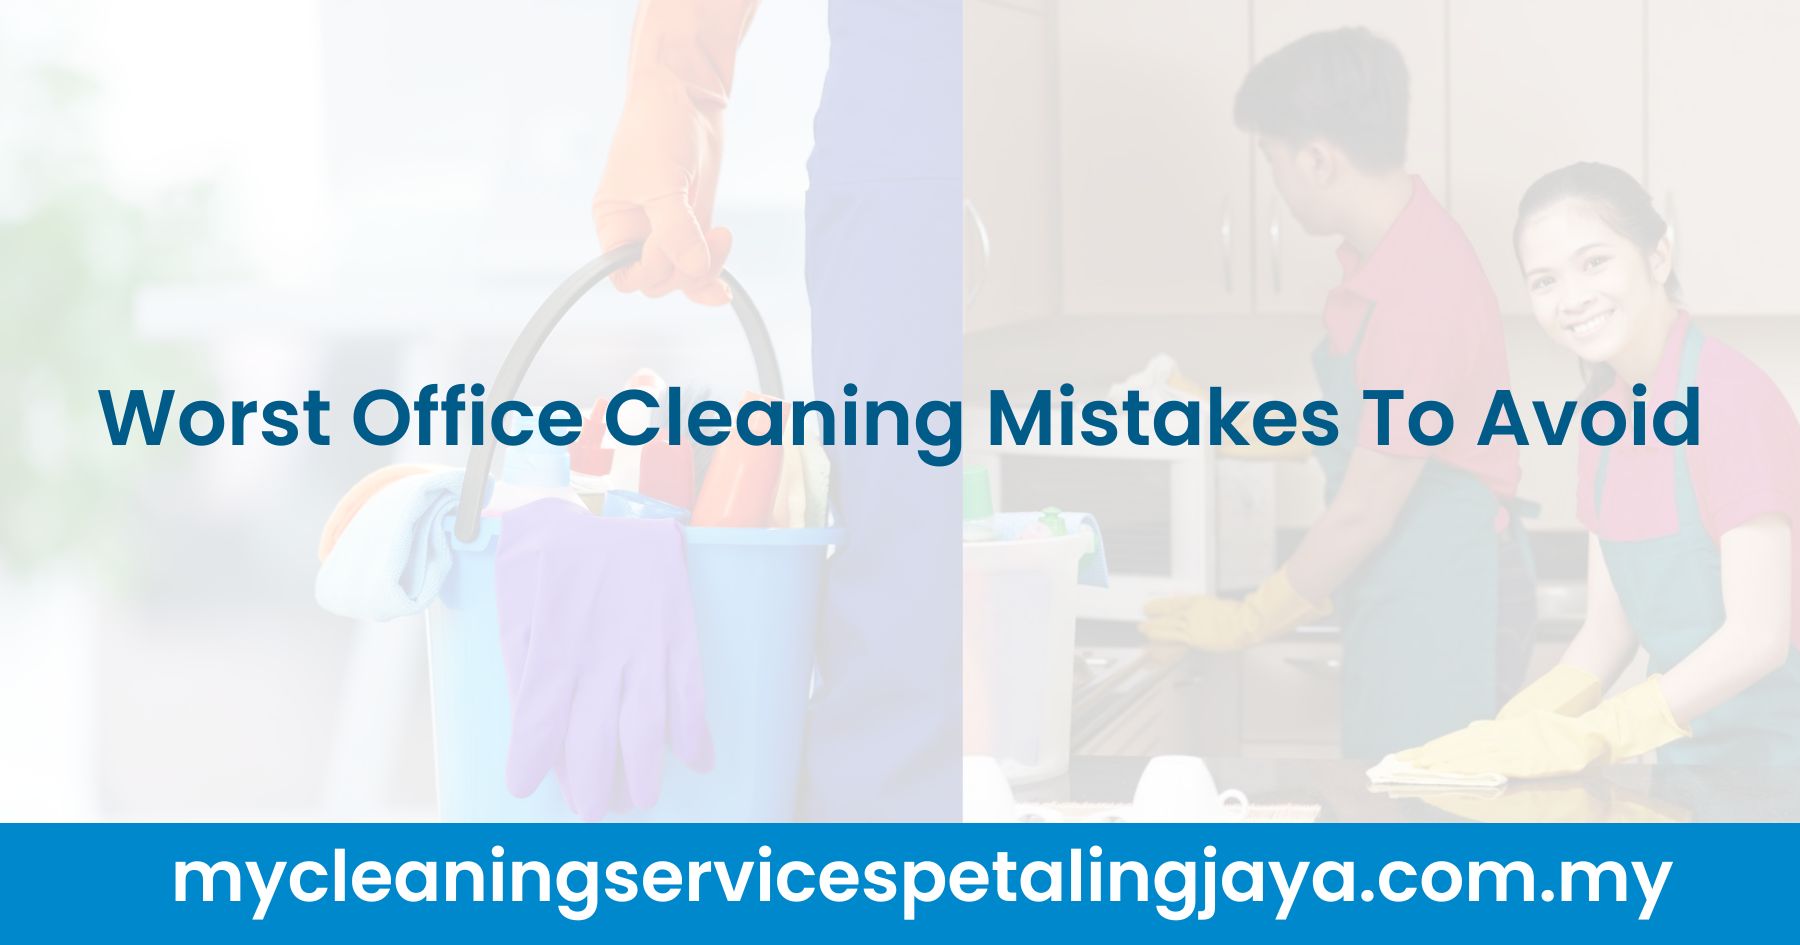 Worst Office Cleaning Mistakes To Avoid